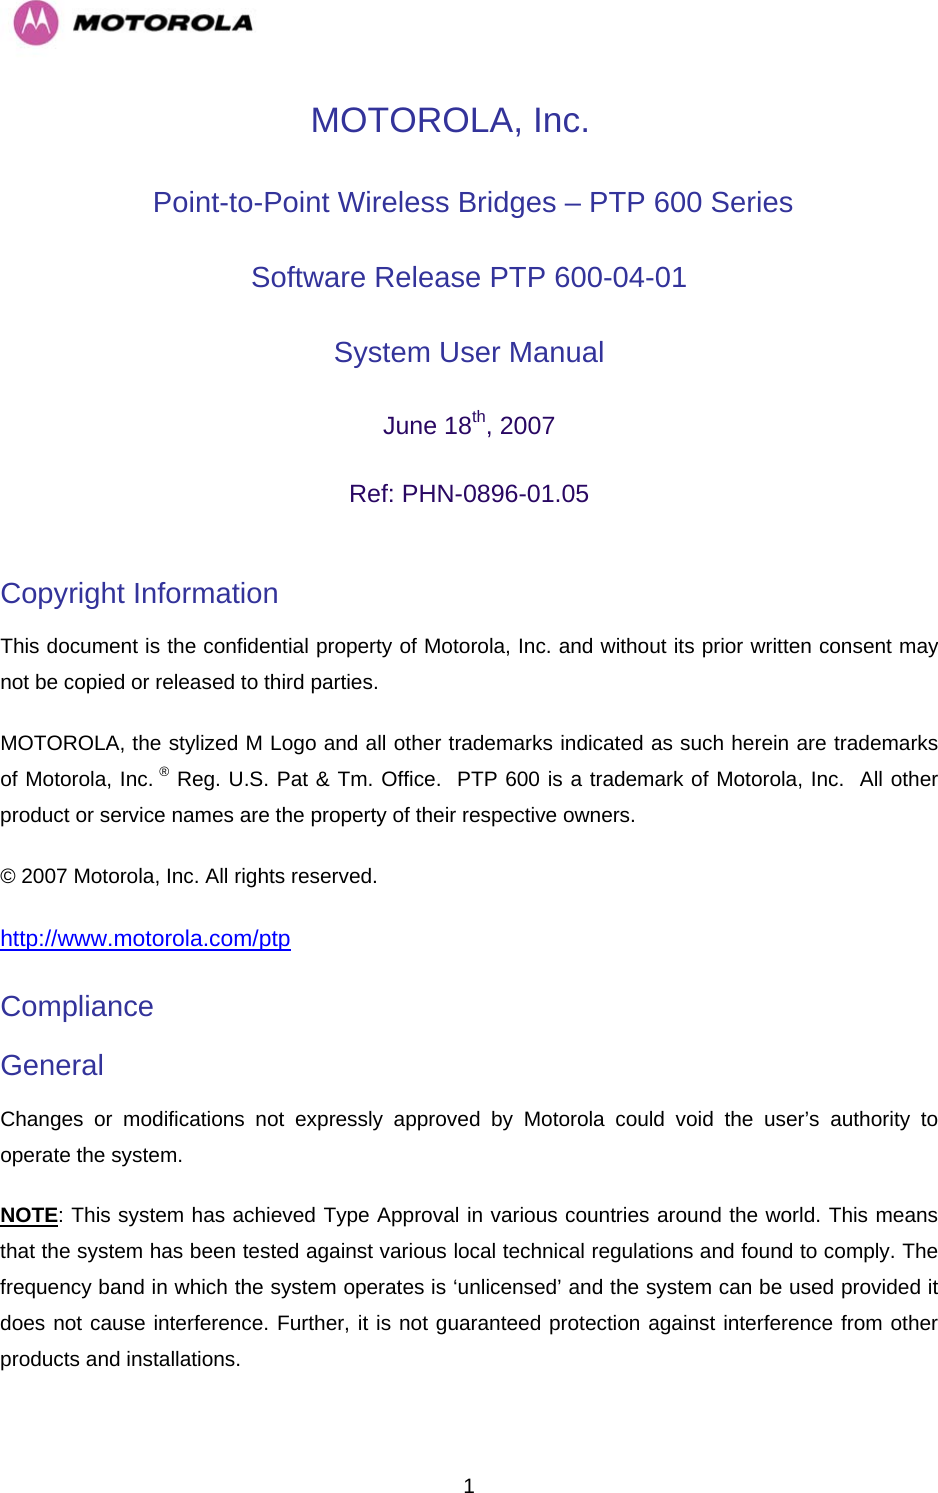   1MOTOROLA, Inc.  Point-to-Point Wireless Bridges – PTP 600 Series Software Release PTP 600-04-01  System User Manual  June 18th, 2007 Ref: PHN-0896-01.05  Copyright Information  This document is the confidential property of Motorola, Inc. and without its prior written consent may not be copied or released to third parties.  MOTOROLA, the stylized M Logo and all other trademarks indicated as such herein are trademarks of Motorola, Inc. ® Reg. U.S. Pat &amp; Tm. Office.  PTP 600 is a trademark of Motorola, Inc.  All other product or service names are the property of their respective owners. © 2007 Motorola, Inc. All rights reserved. http://www.motorola.com/ptpCompliance  General Changes or modifications not expressly approved by Motorola could void the user’s authority to operate the system.  NOTE: This system has achieved Type Approval in various countries around the world. This means that the system has been tested against various local technical regulations and found to comply. The frequency band in which the system operates is ‘unlicensed’ and the system can be used provided it does not cause interference. Further, it is not guaranteed protection against interference from other products and installations. 